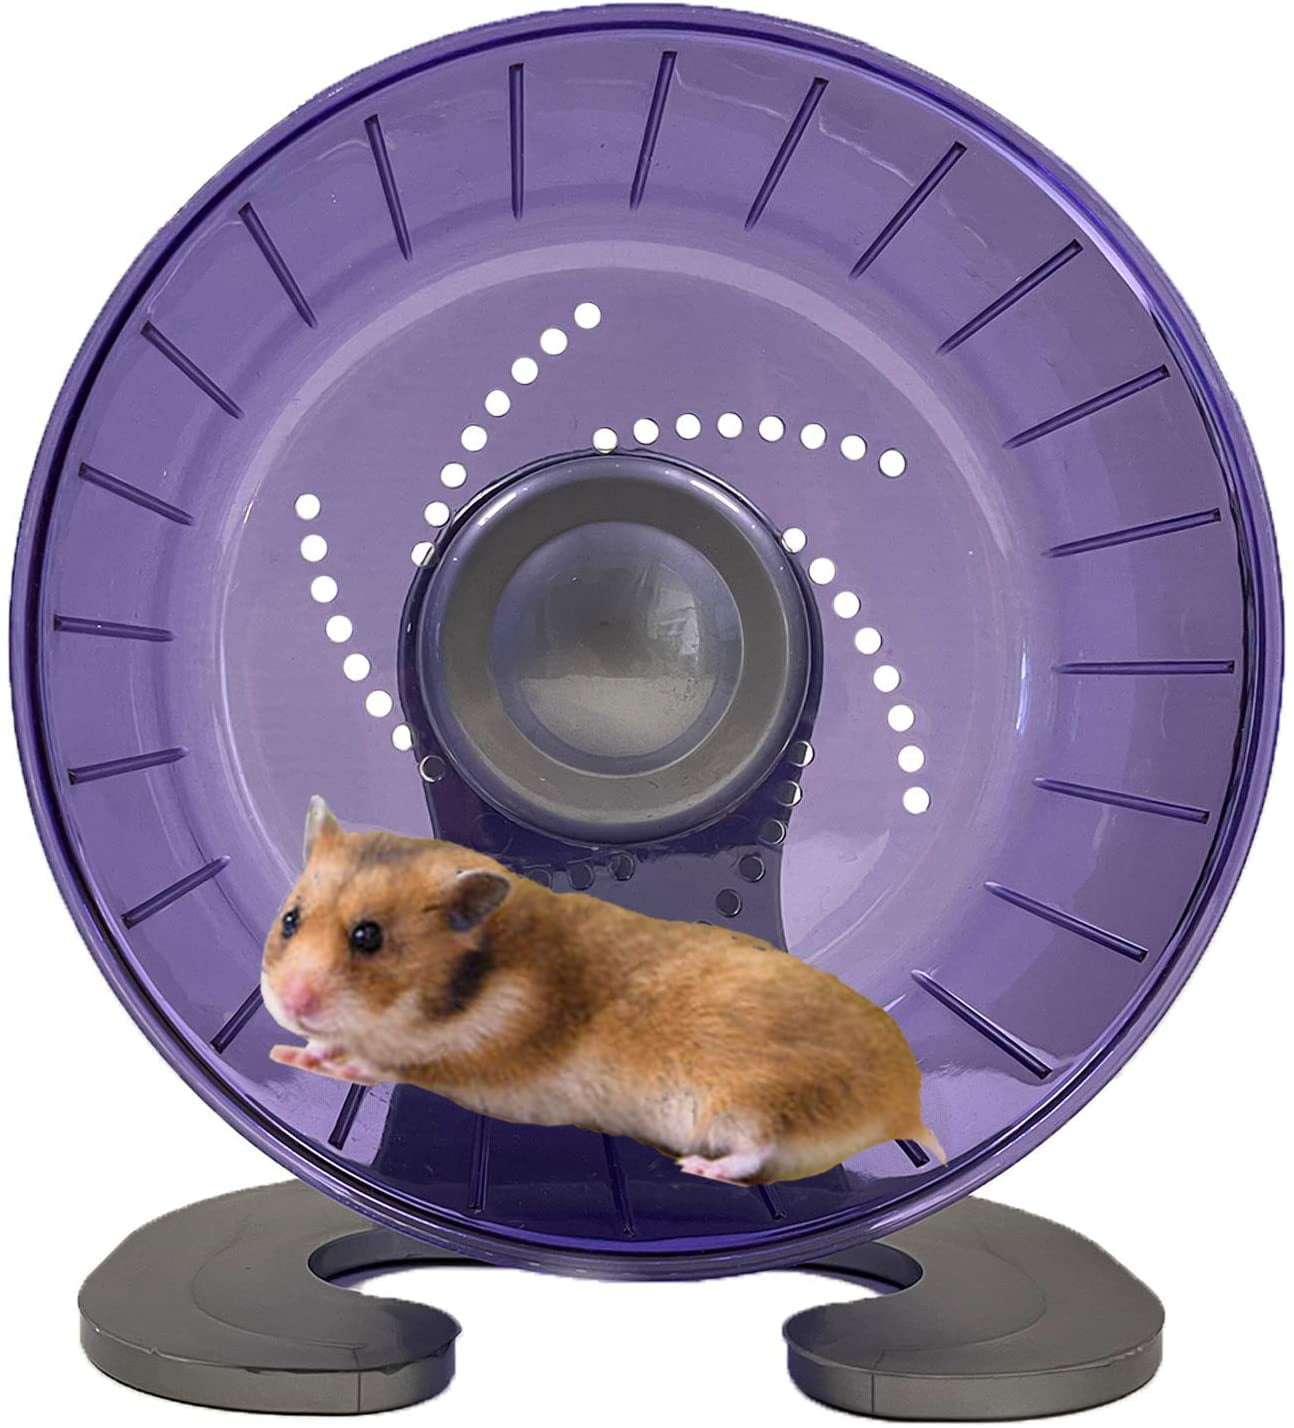 or Mice Gerbils Hamster Toys for Hamster Cage Super Mute Spinner Exercise Running Wheel for Hamsters Goldeal 5.5 Inches Silent Hamster Wheel